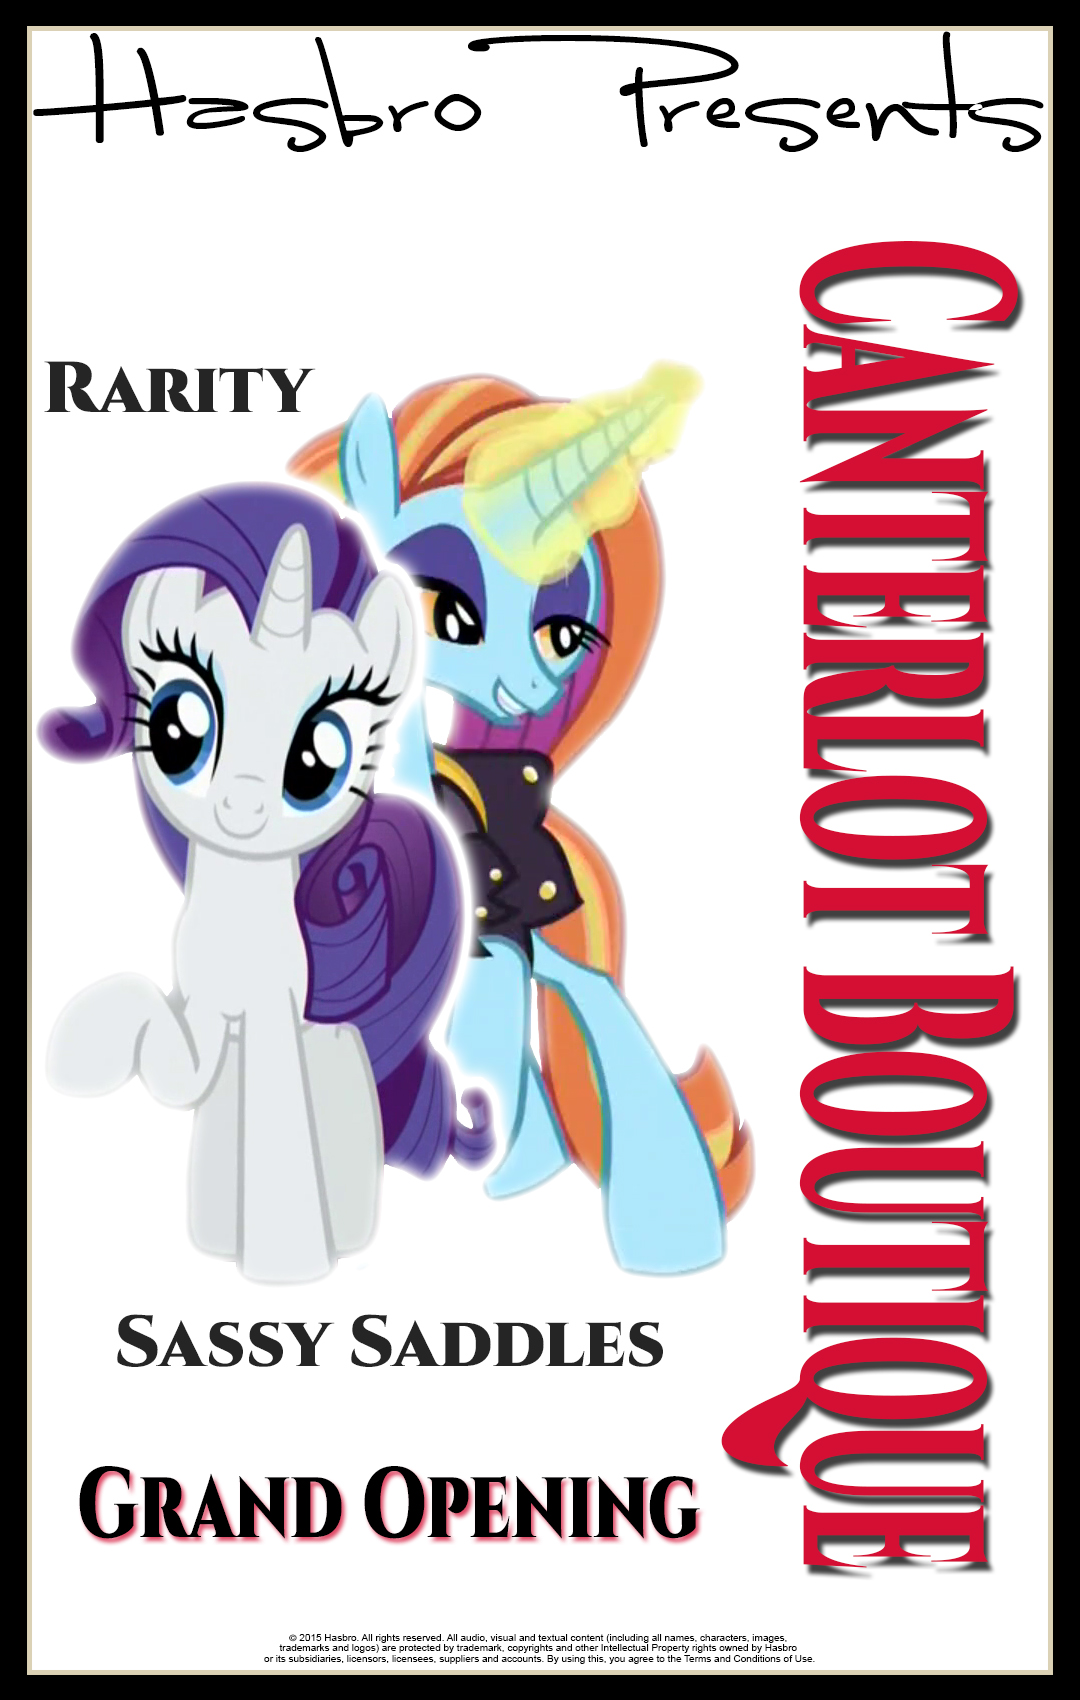 mlp___canterlot_boutique_movie_poster_by_pims1978-d99gb5p.jpg